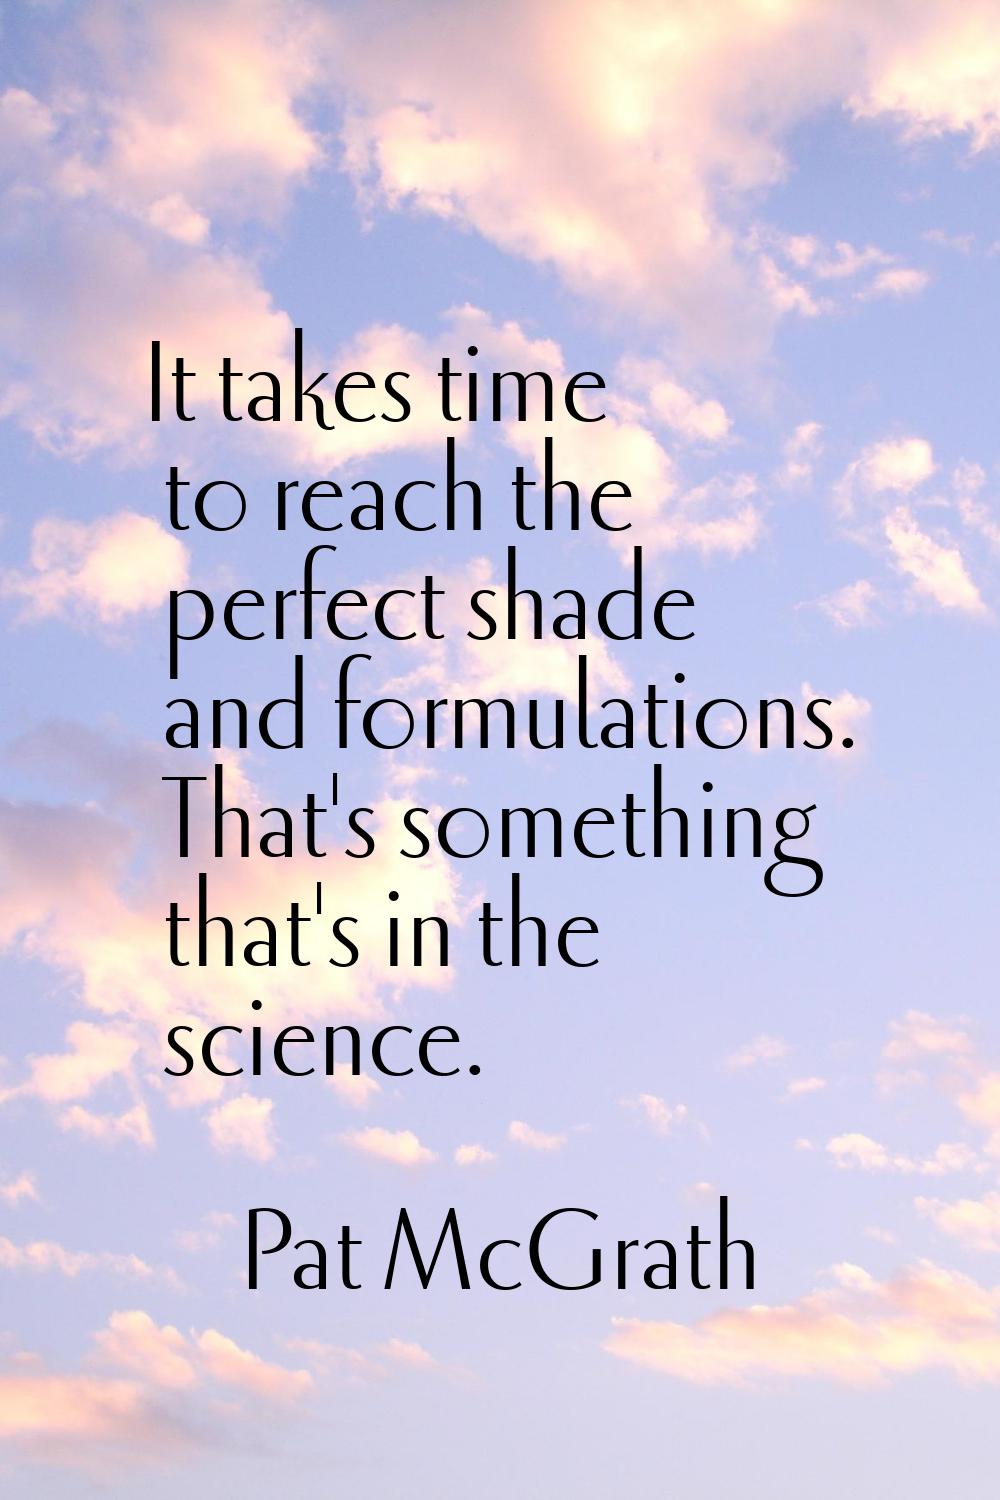 It takes time to reach the perfect shade and formulations. That's something that's in the science.